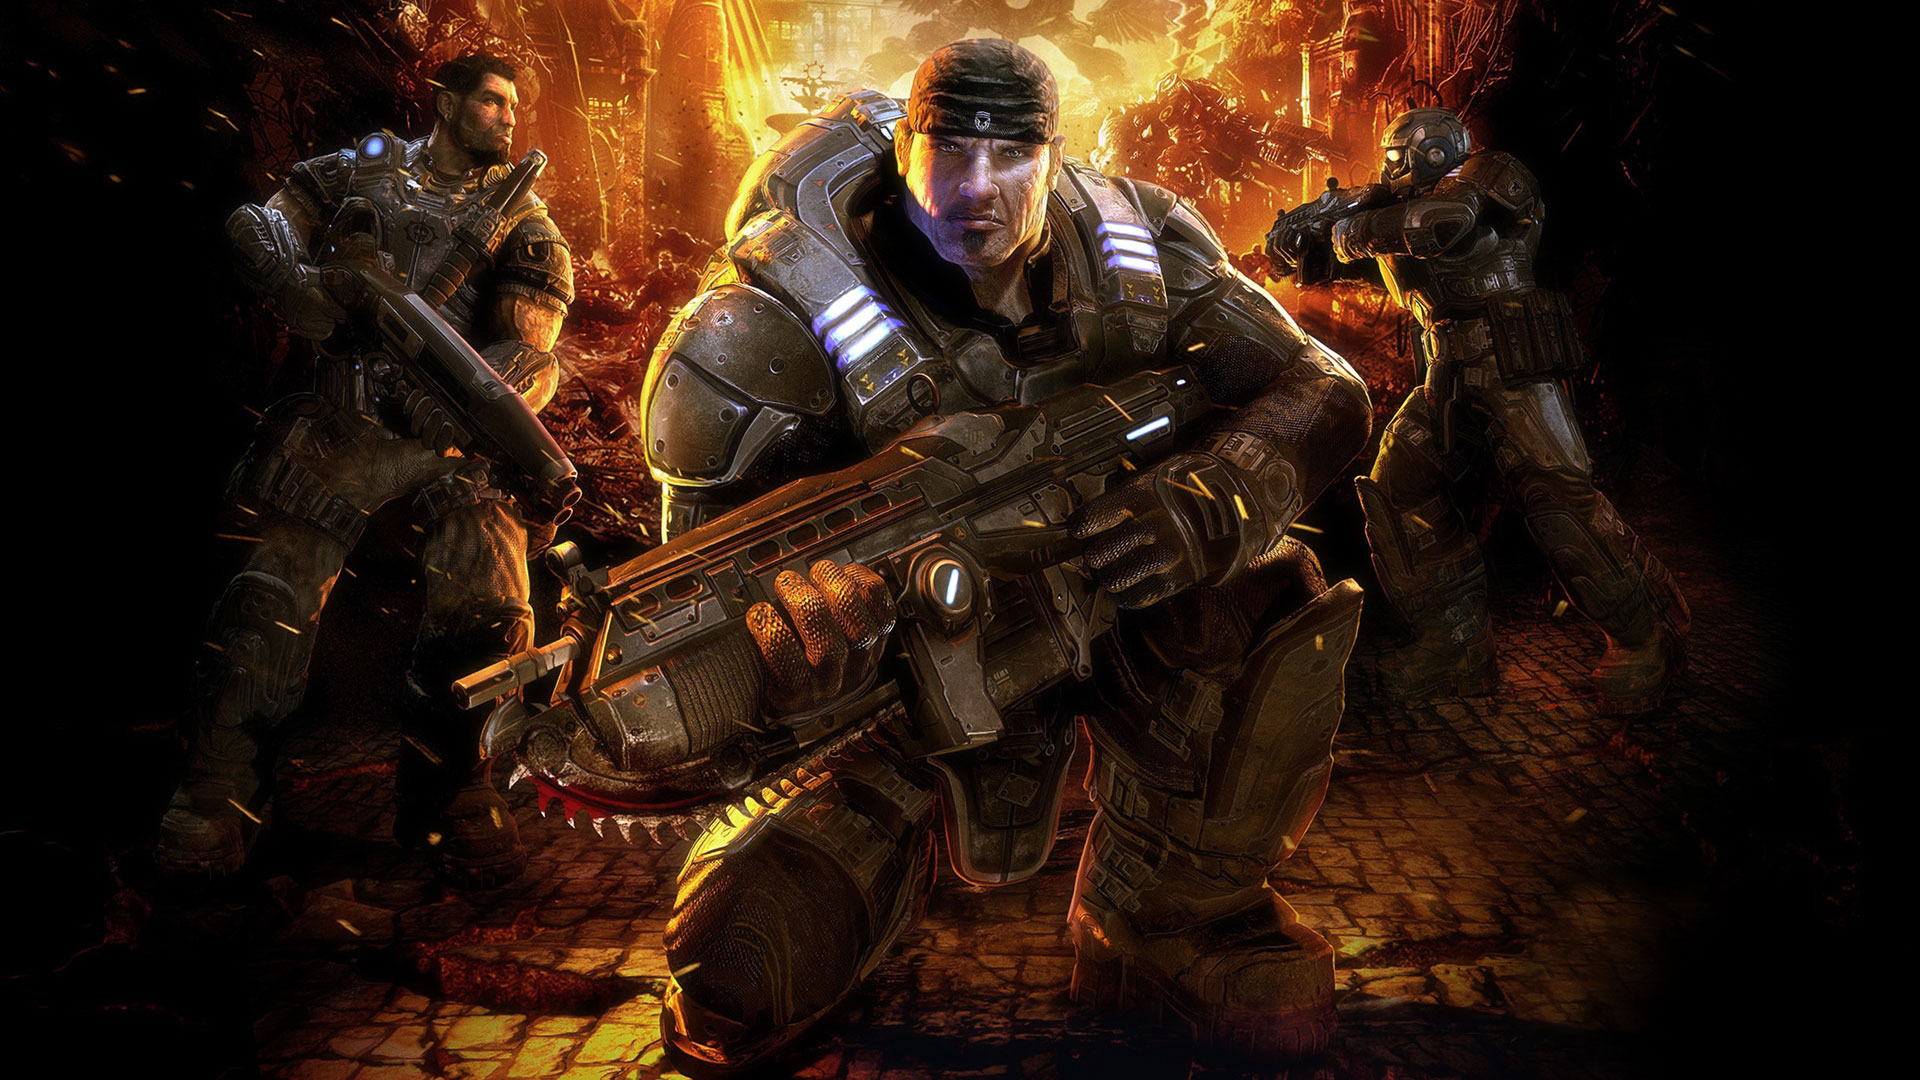 According to a source close to Polygon, a remastered edition of the original Gears of War is currently in the works for the Xbox One at Splash Damage ...